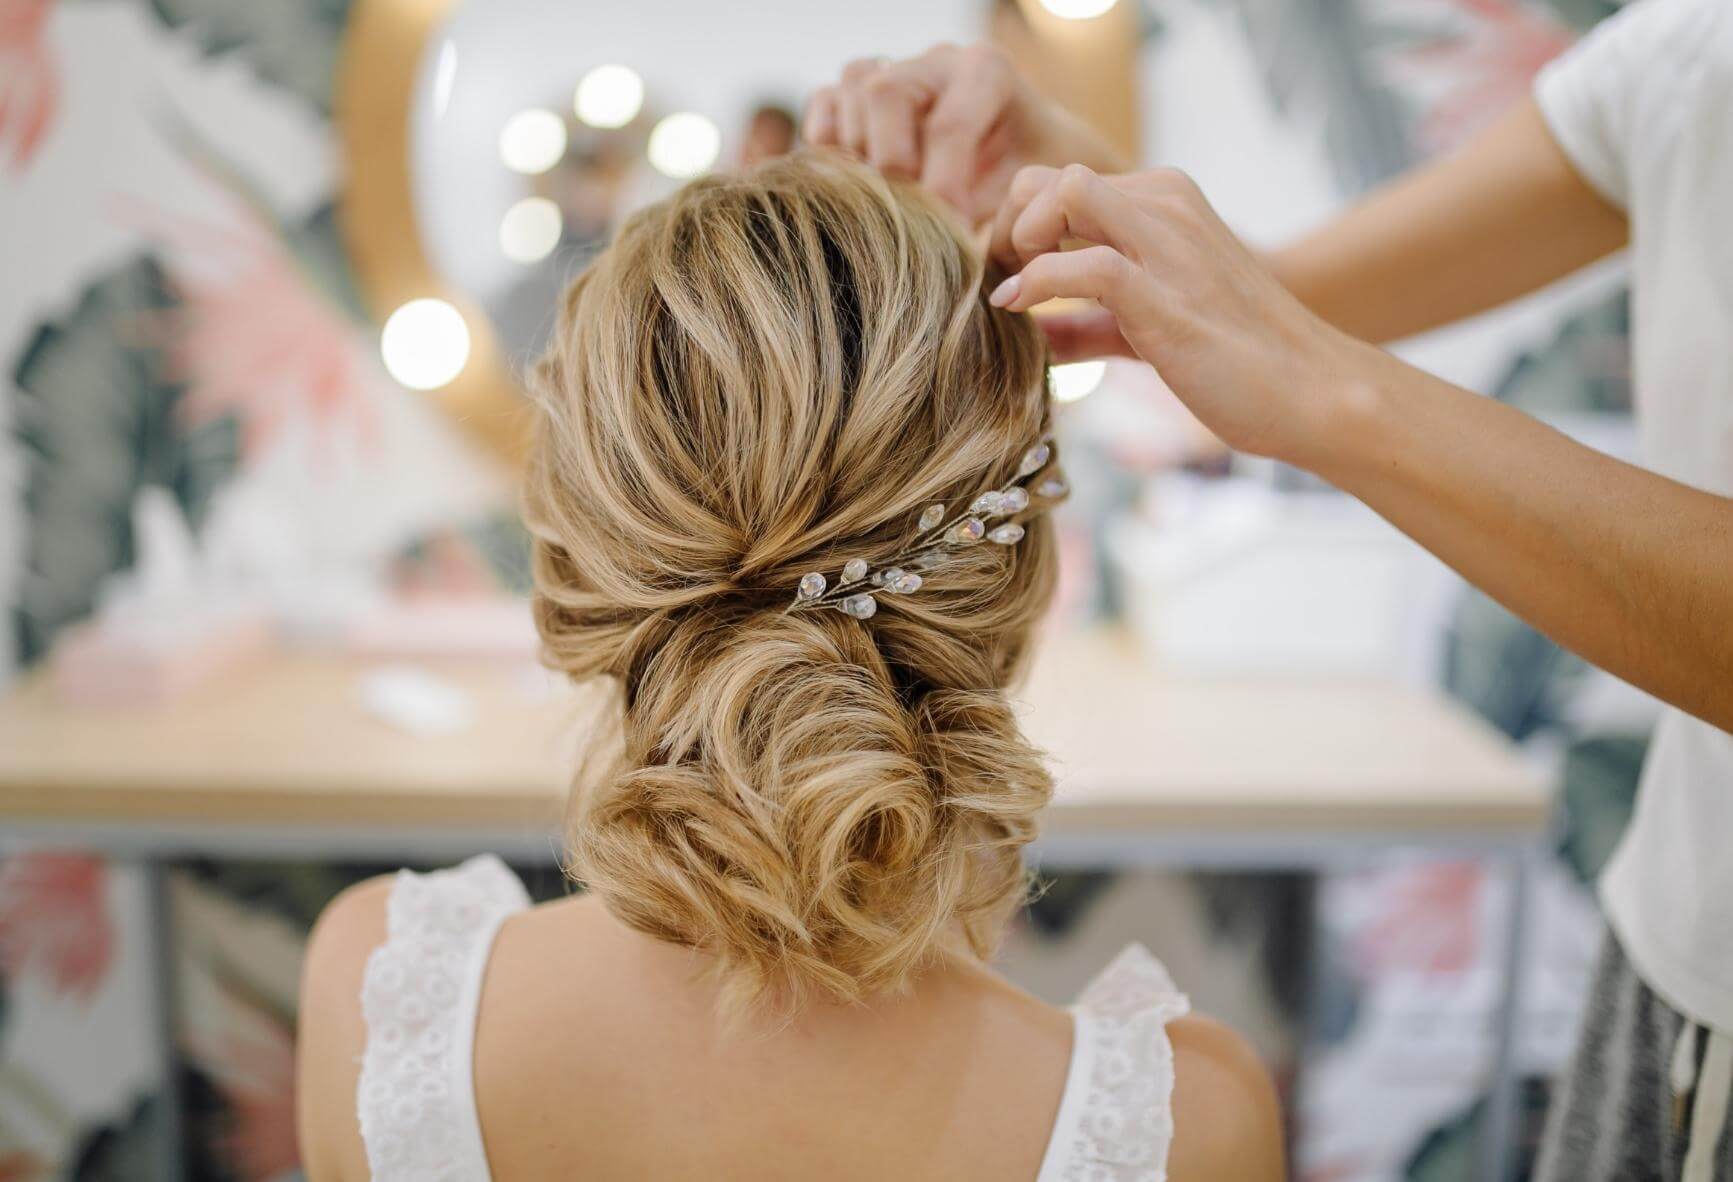 Hair stylist finishing a woman's up-do wedding hairstyle